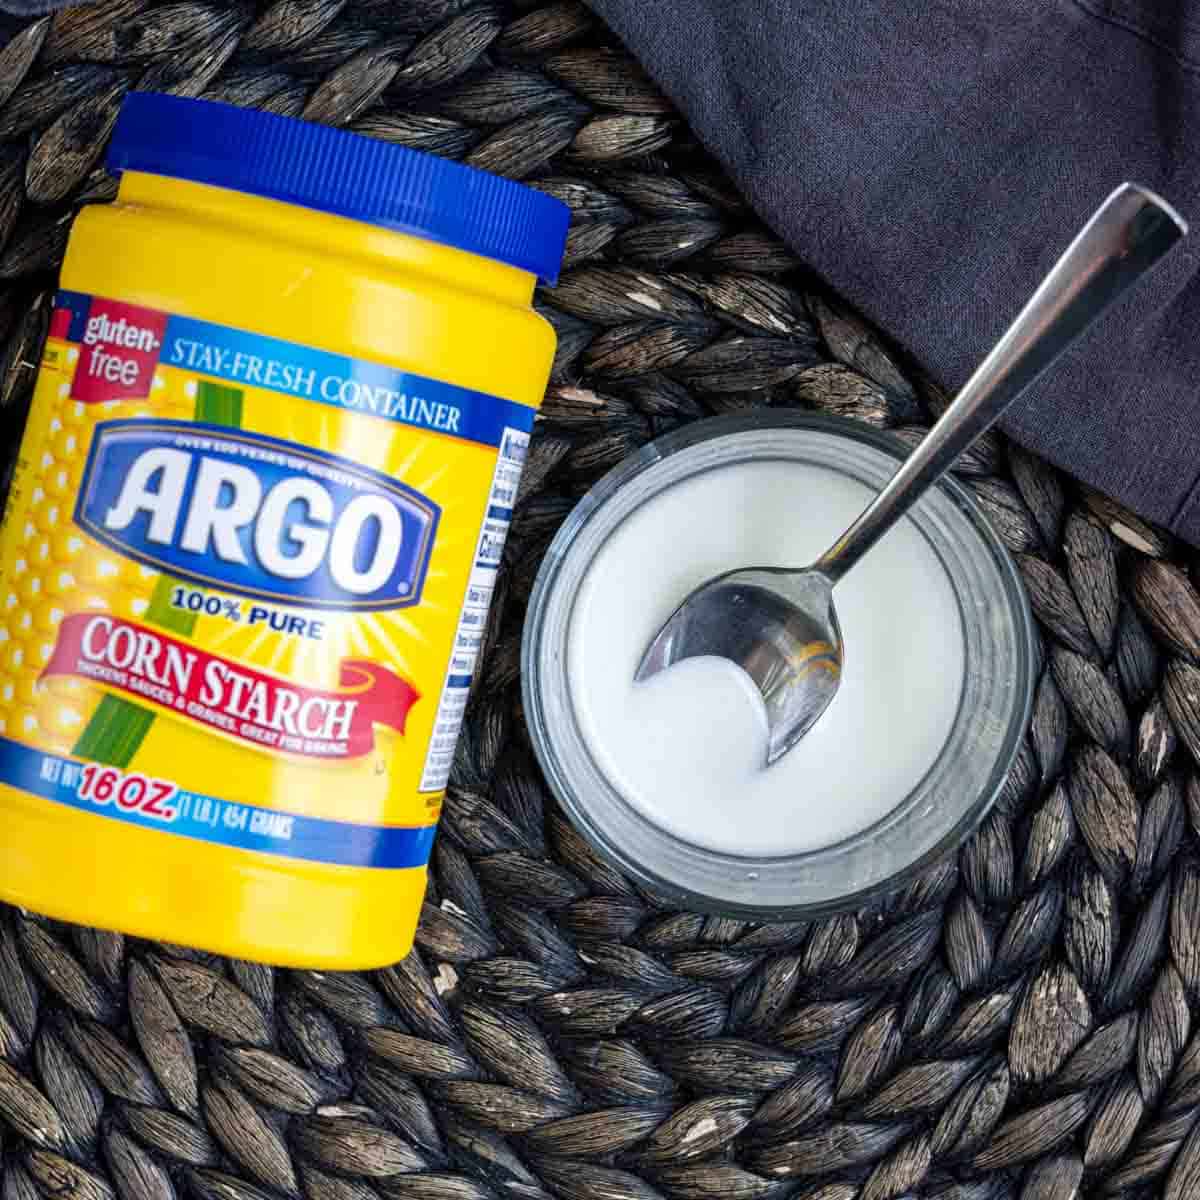 A jar of argo corn syrup next to a spoon to make apple pie filling